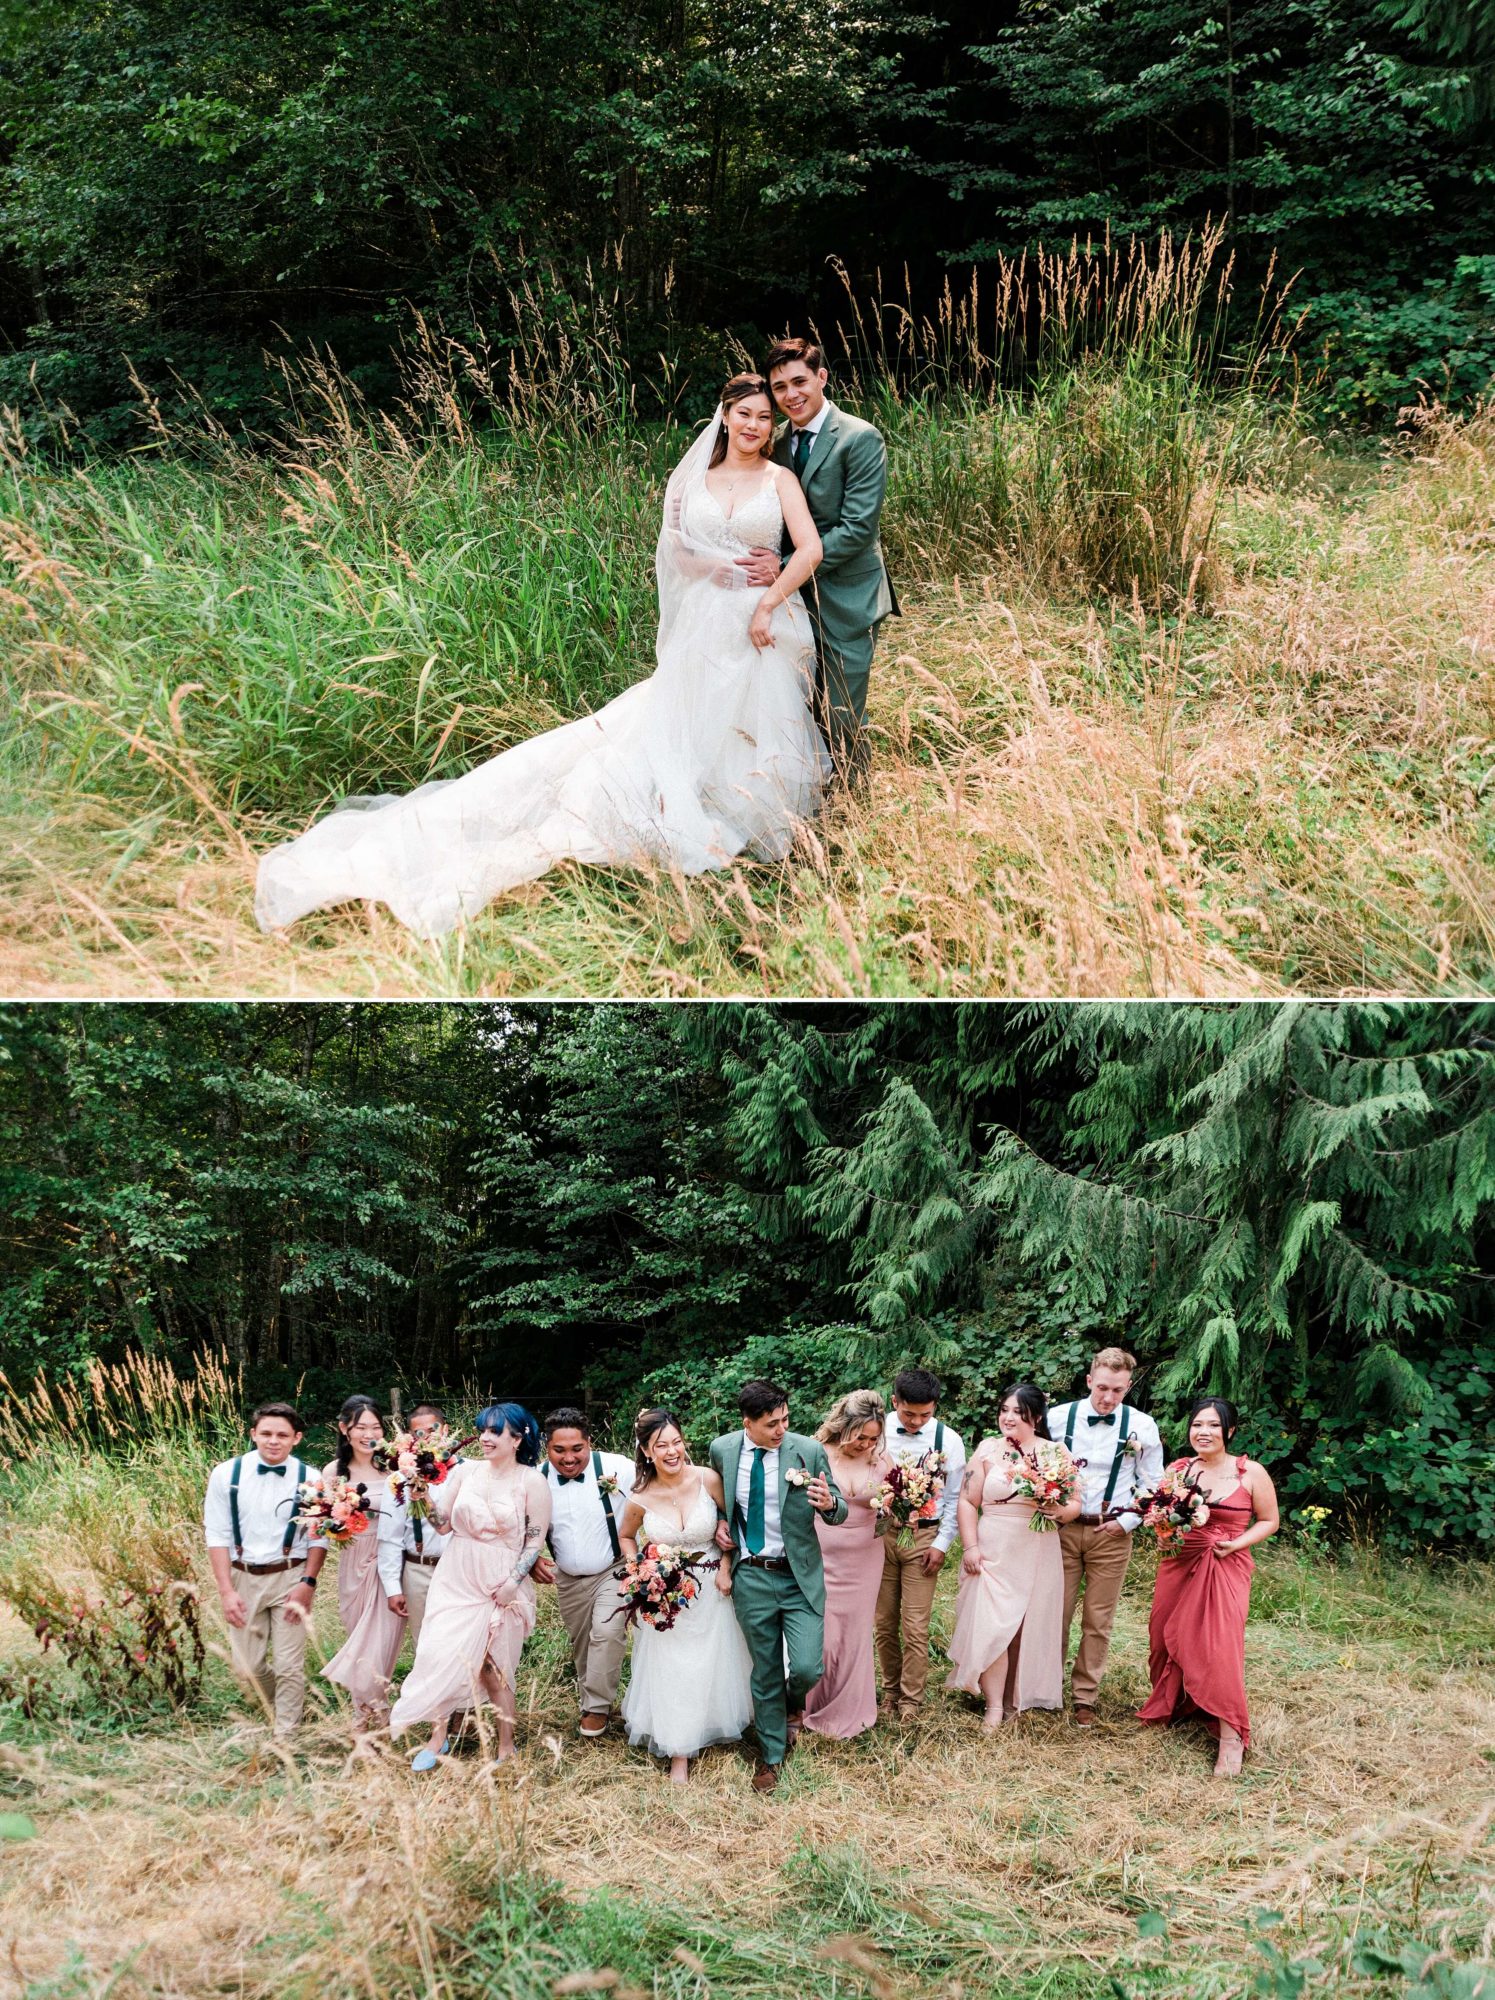  Bride, groom, and bridal party in a meadow at Misty Clover Farm Olympic Peninsula Wedding Venue